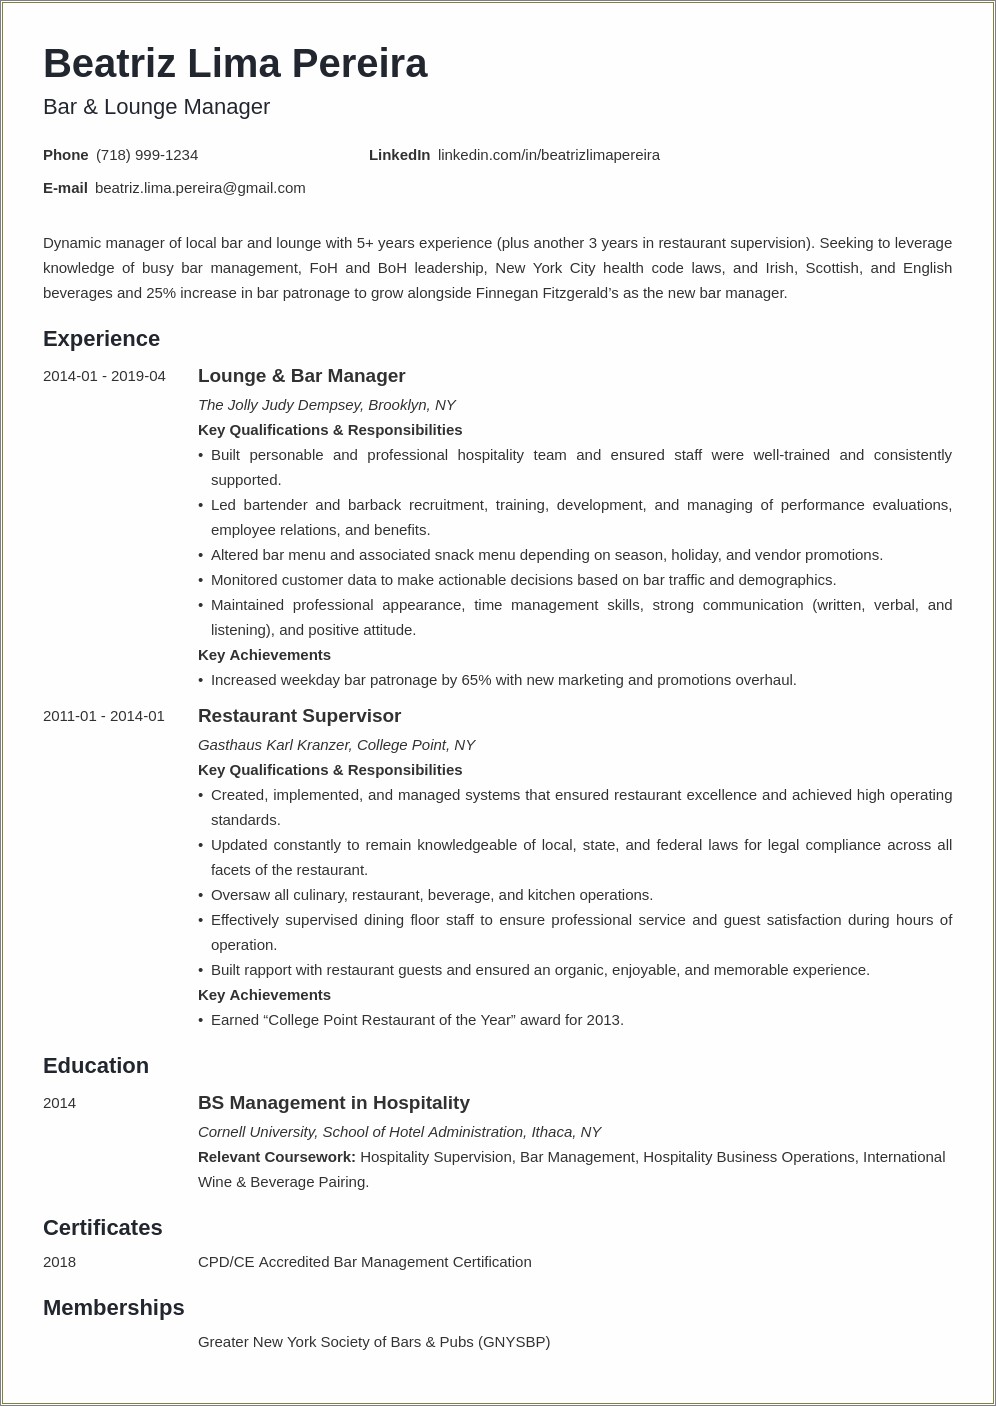 Food And Beverage Manager Resume Example